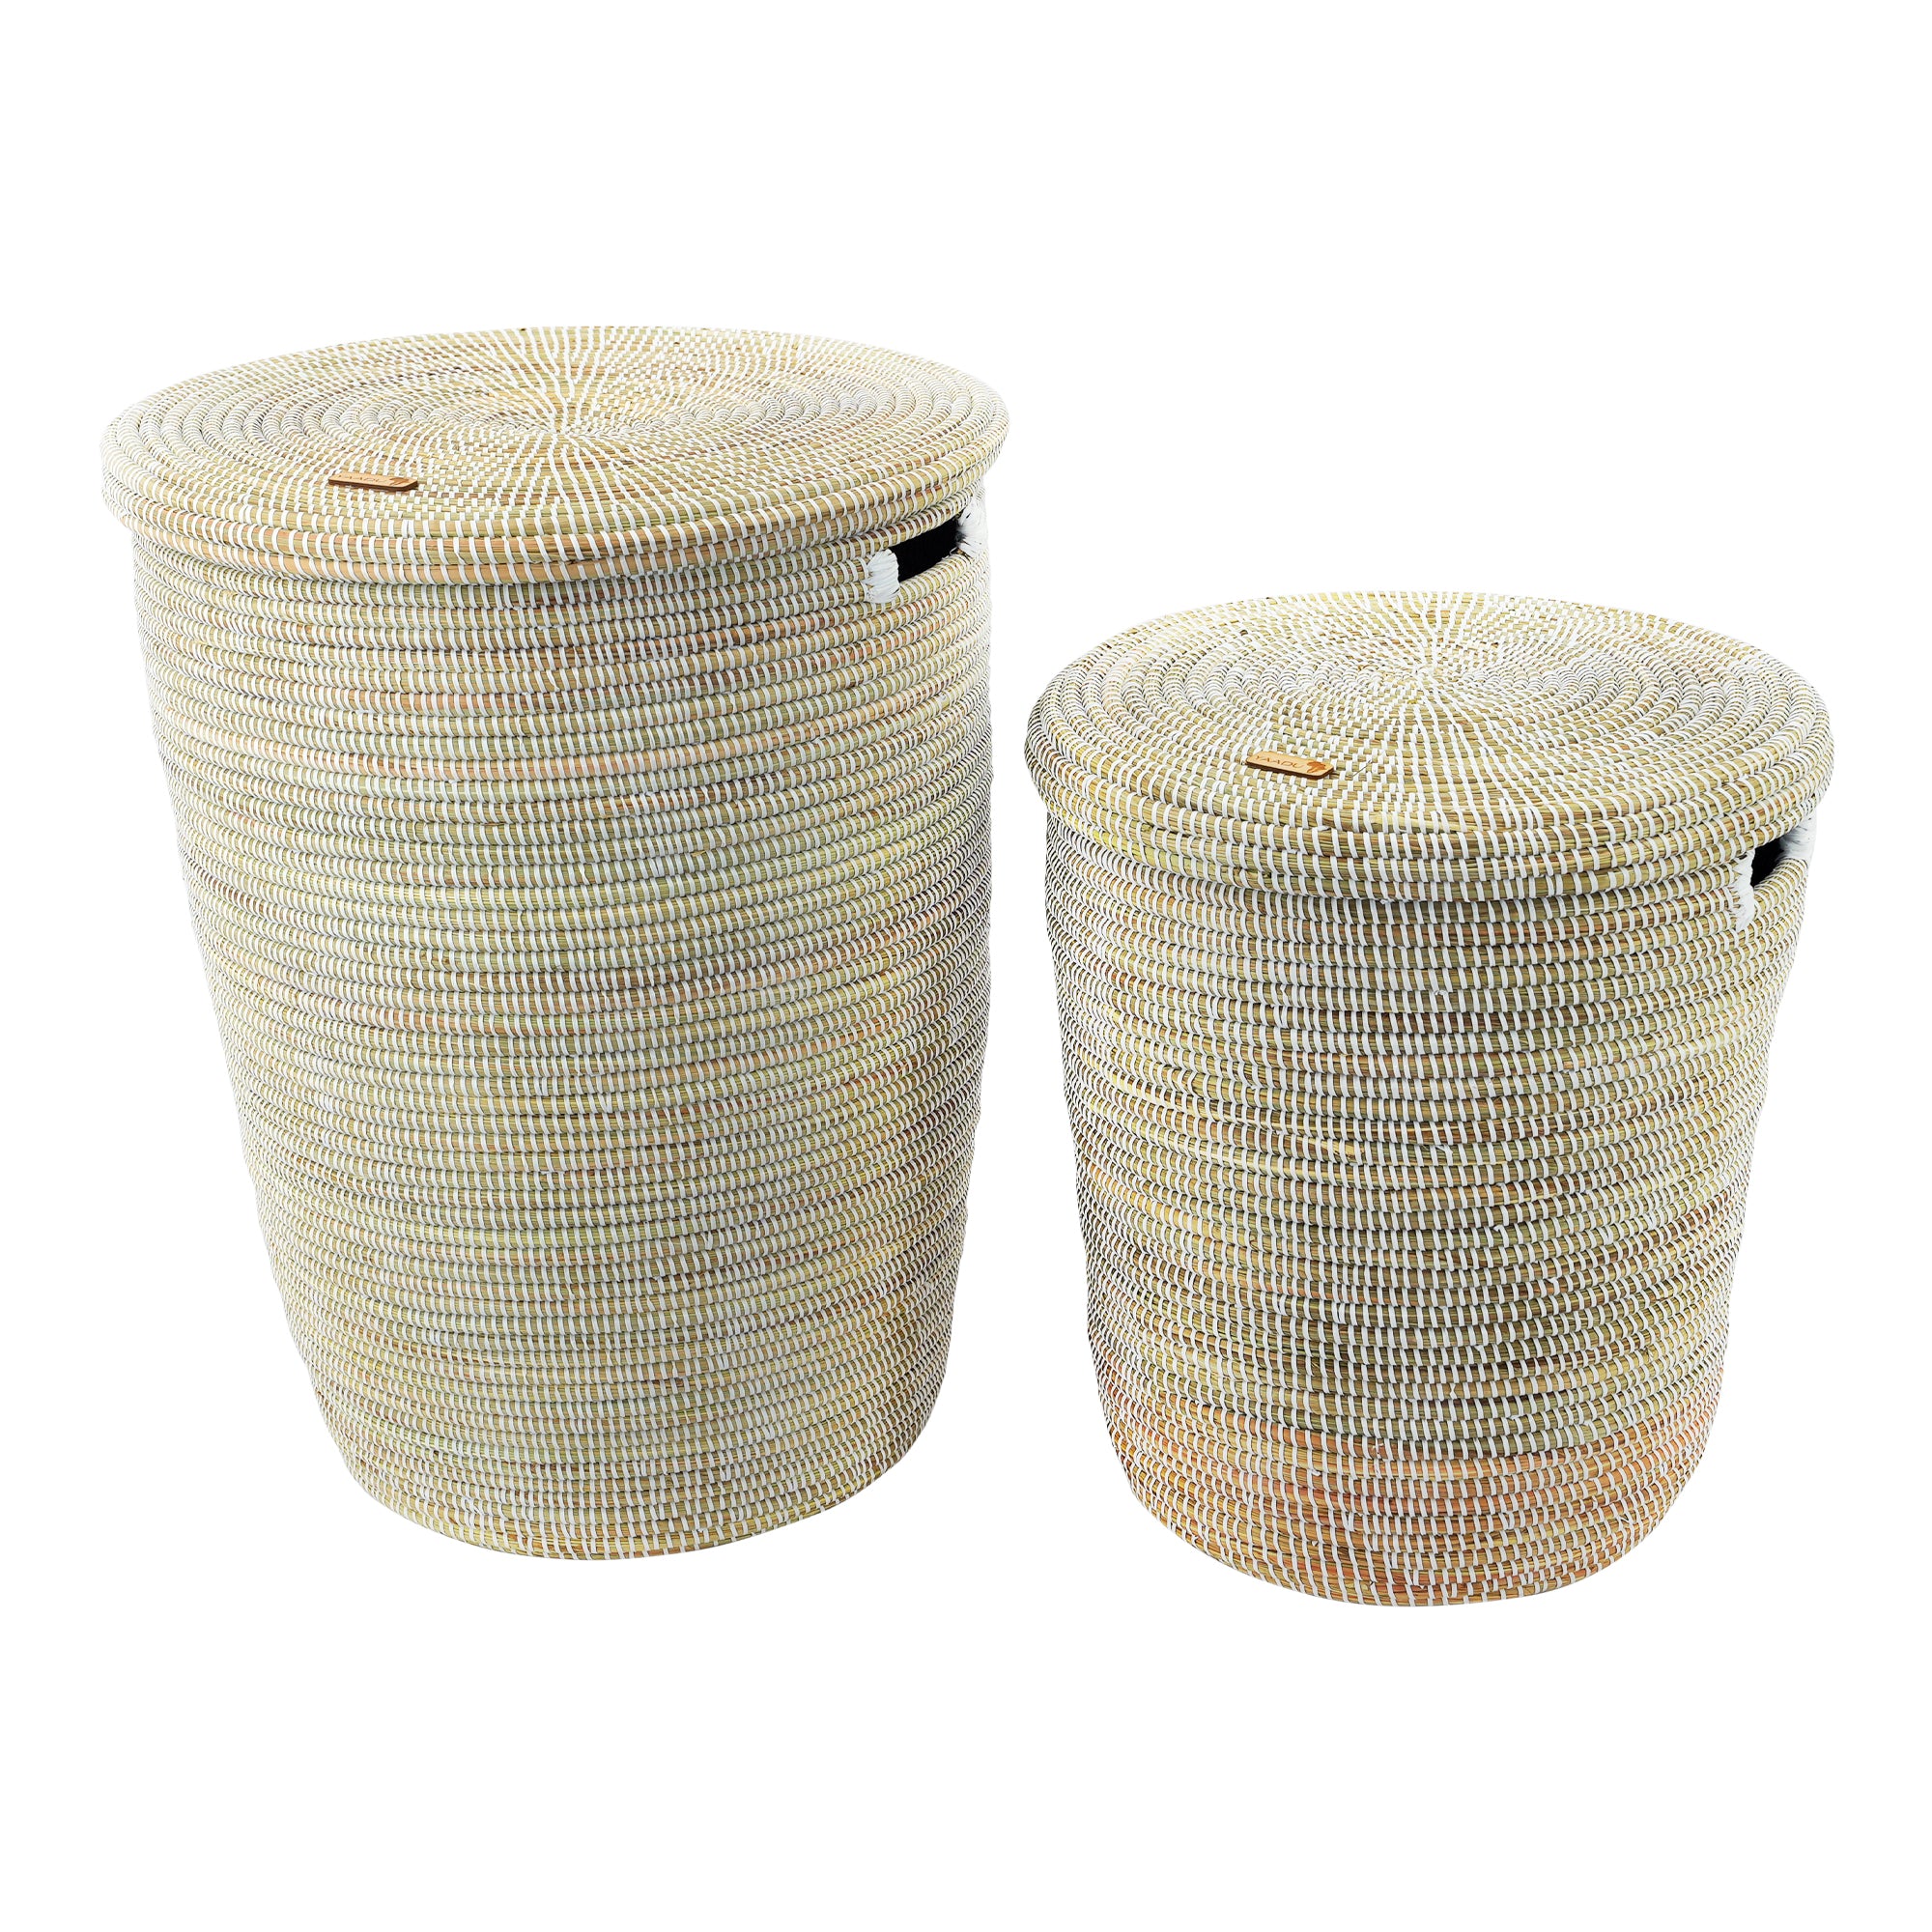 African laundry baskets with flat lid – white